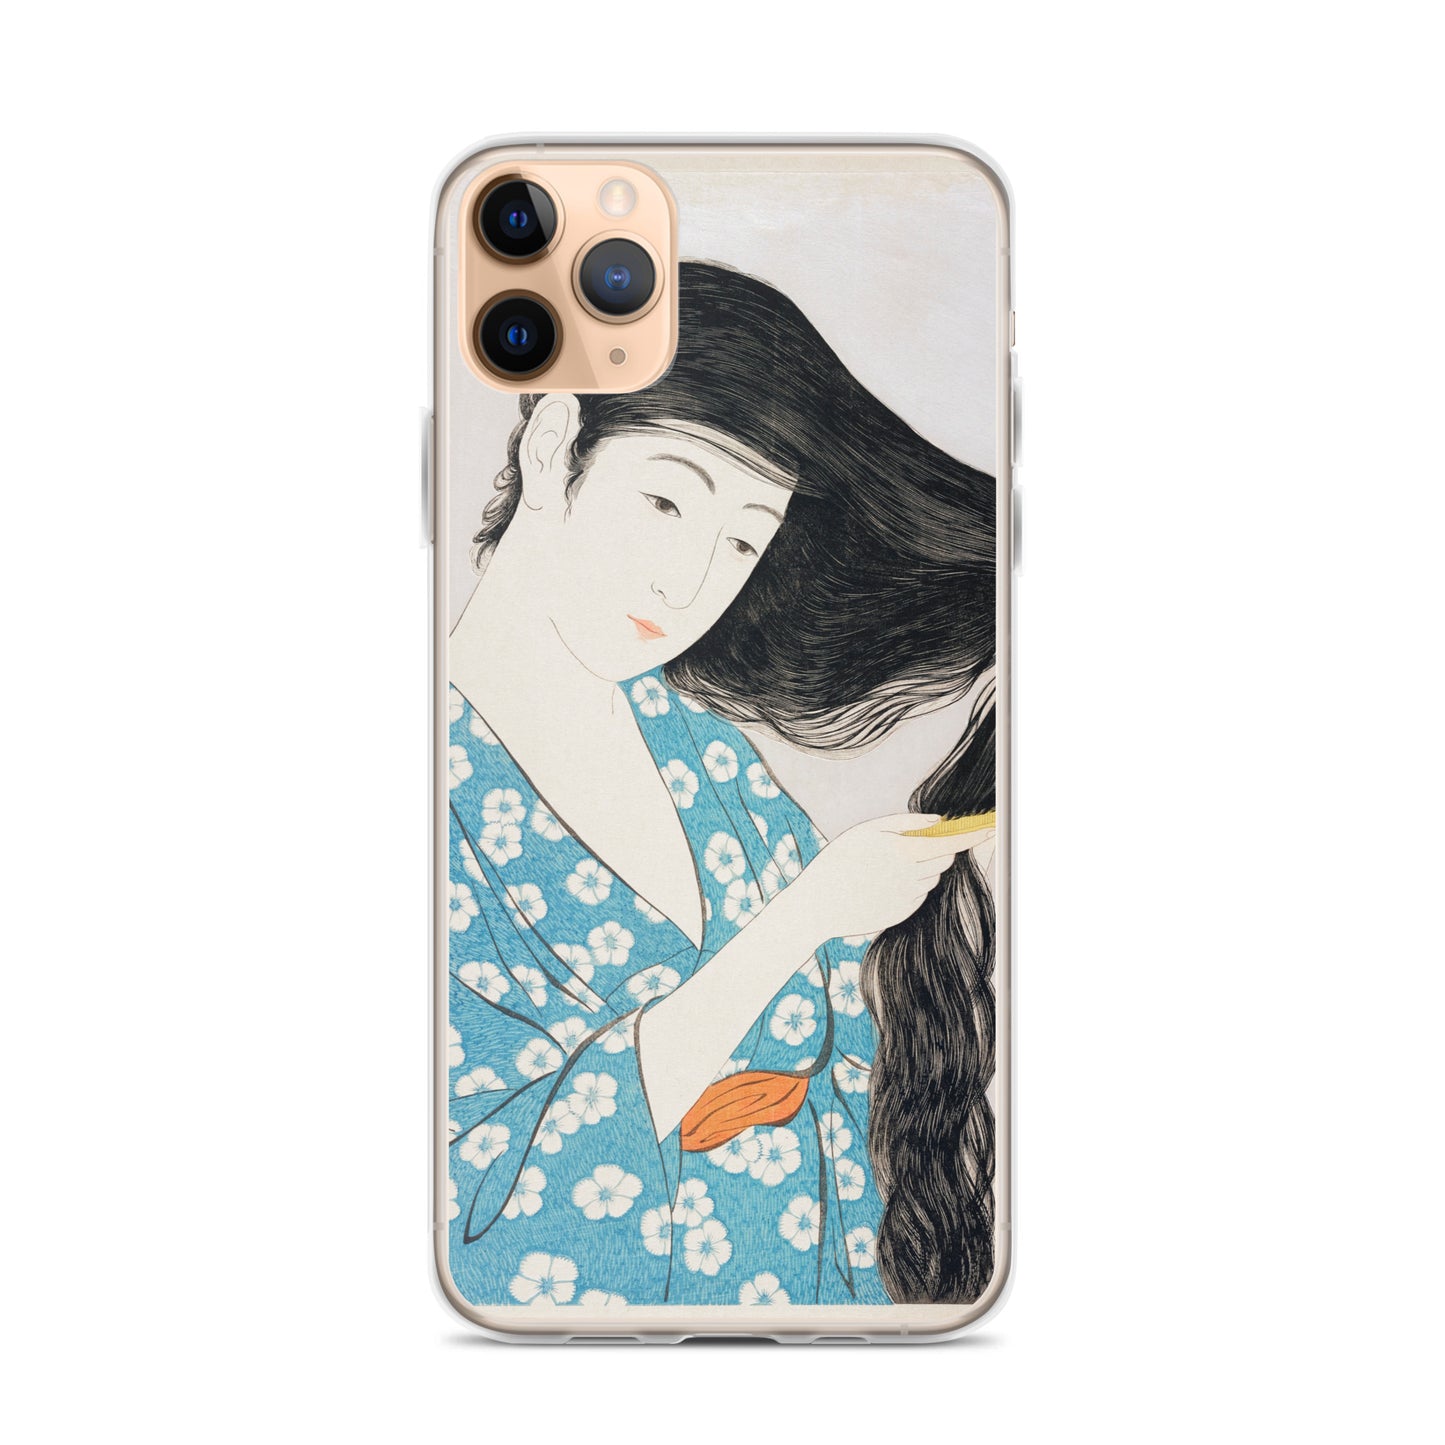 Woman Combing Her Hair iPhone Case